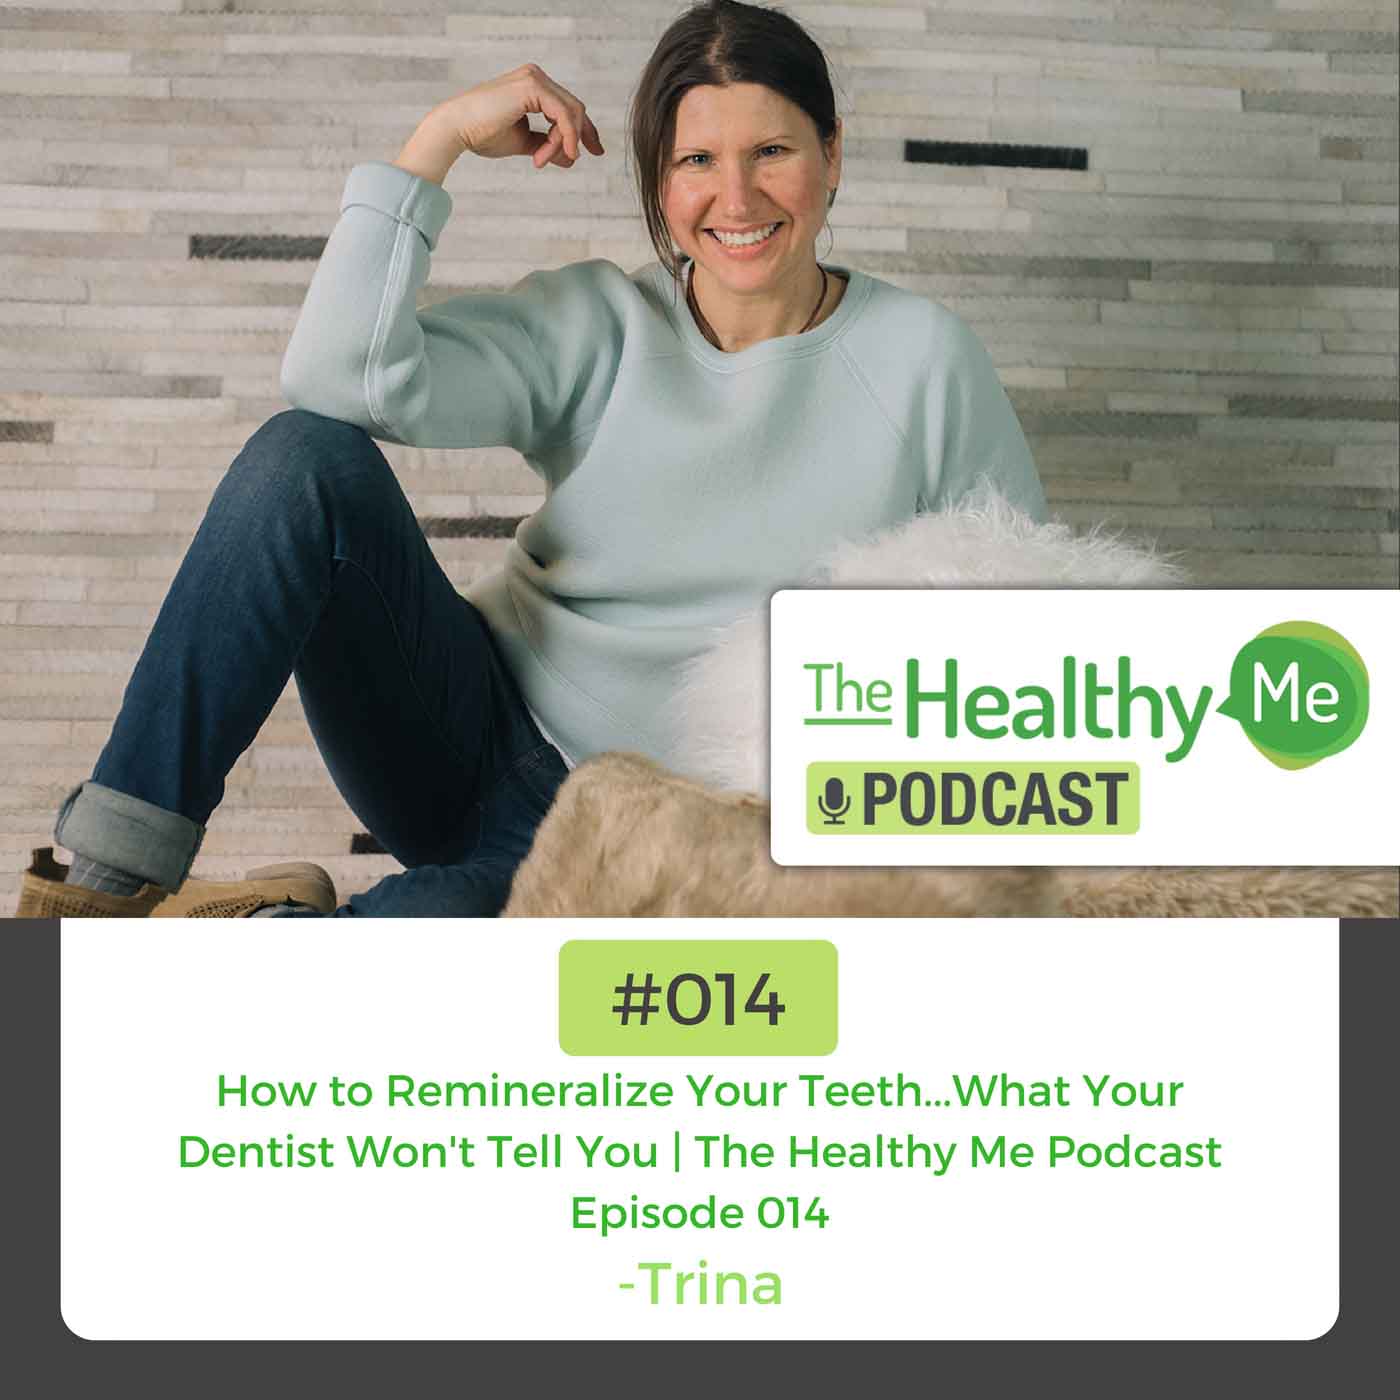 How to Remineralize Your Teeth...What Your Dentist Won't Tell You | The Healthy Me Podcast Episode 014